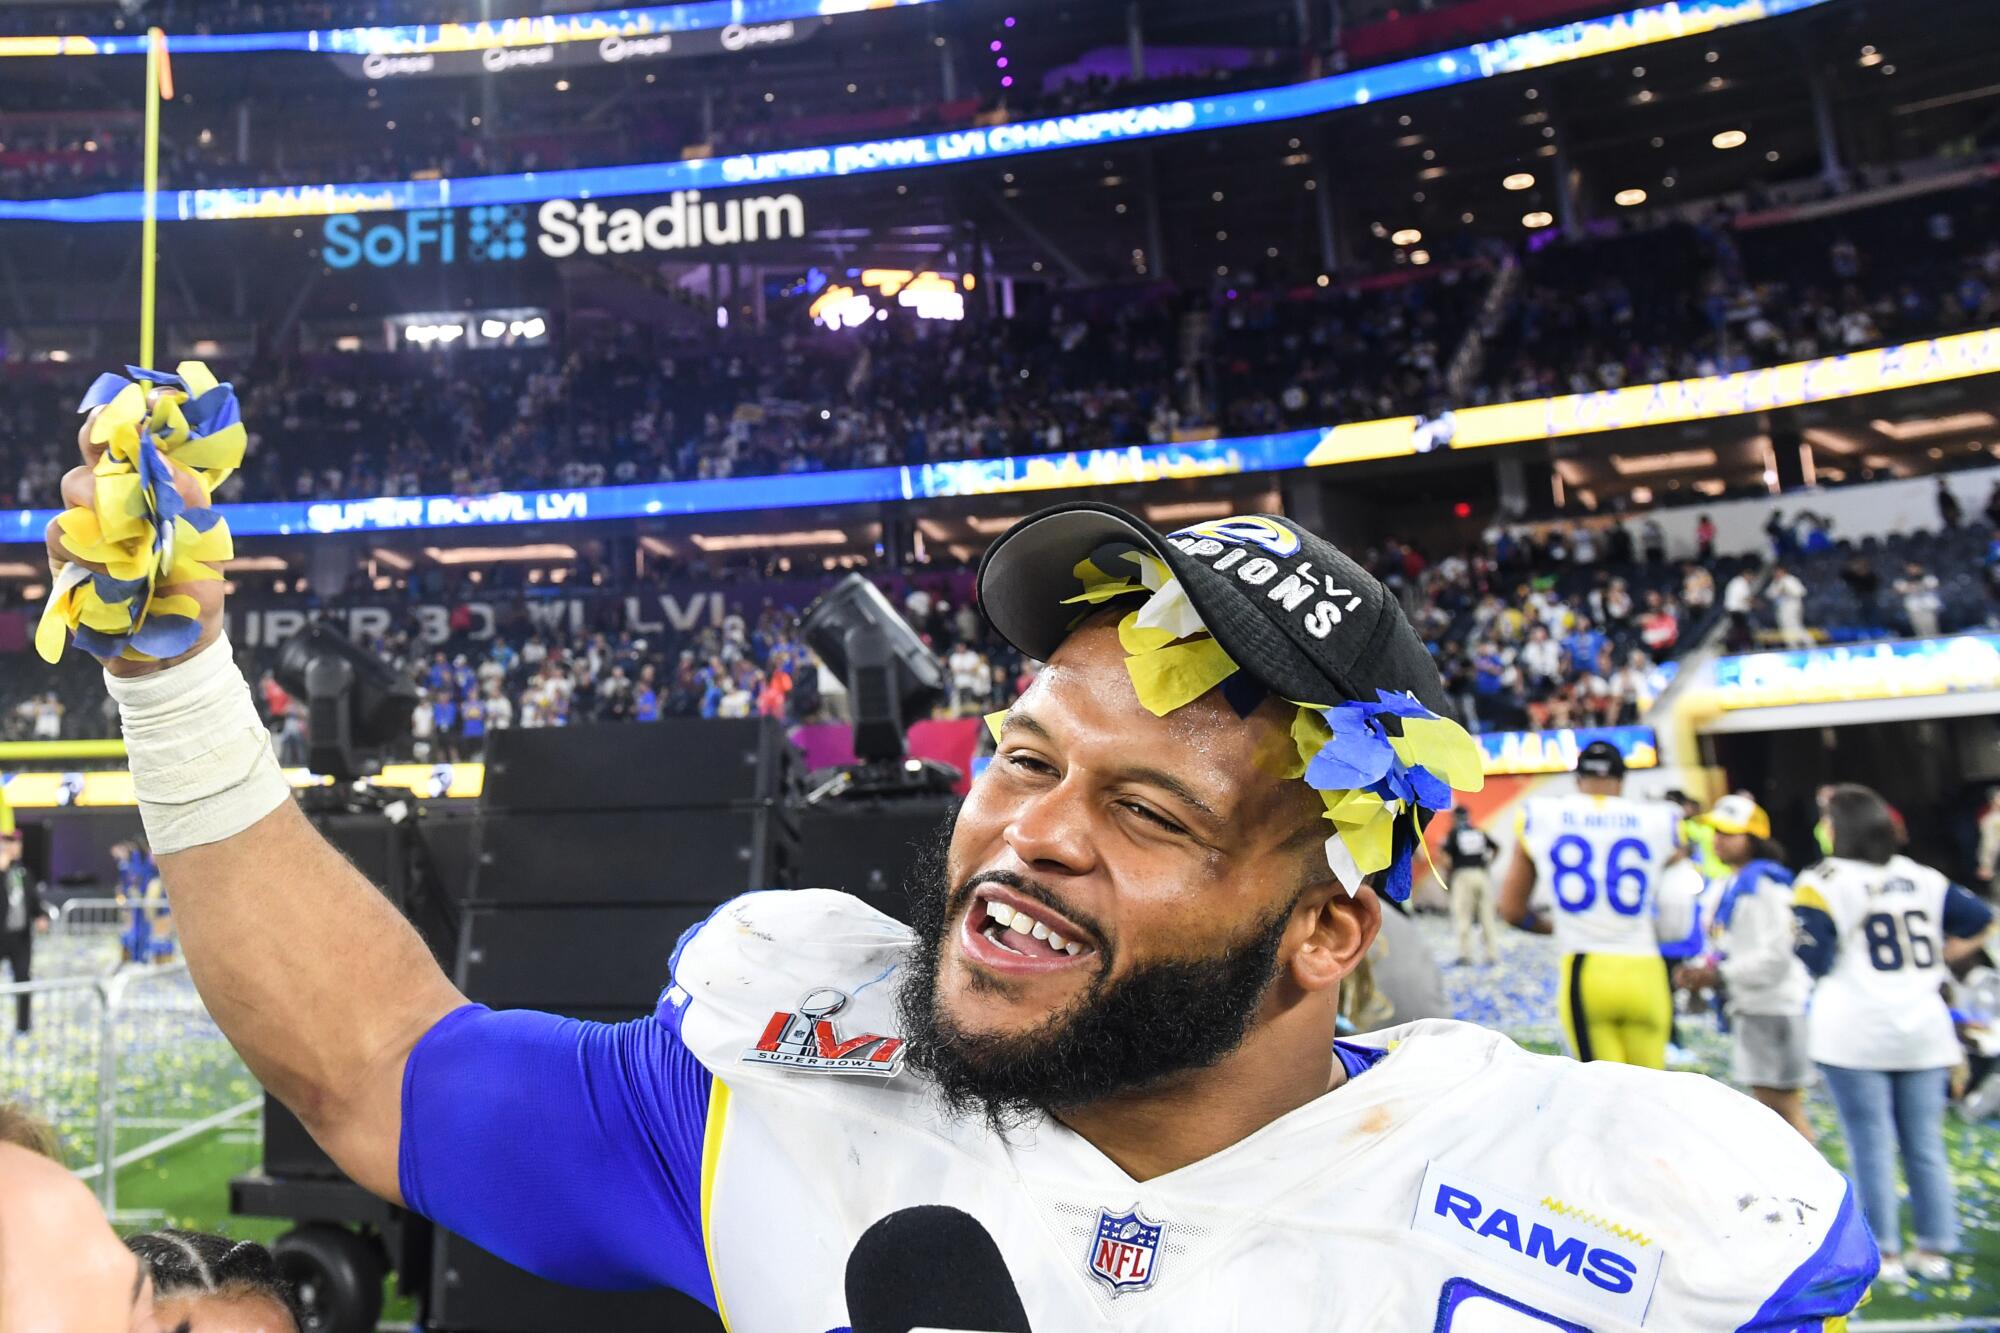 With Super Bowl ring on line, Rams' Aaron Donald answered bell